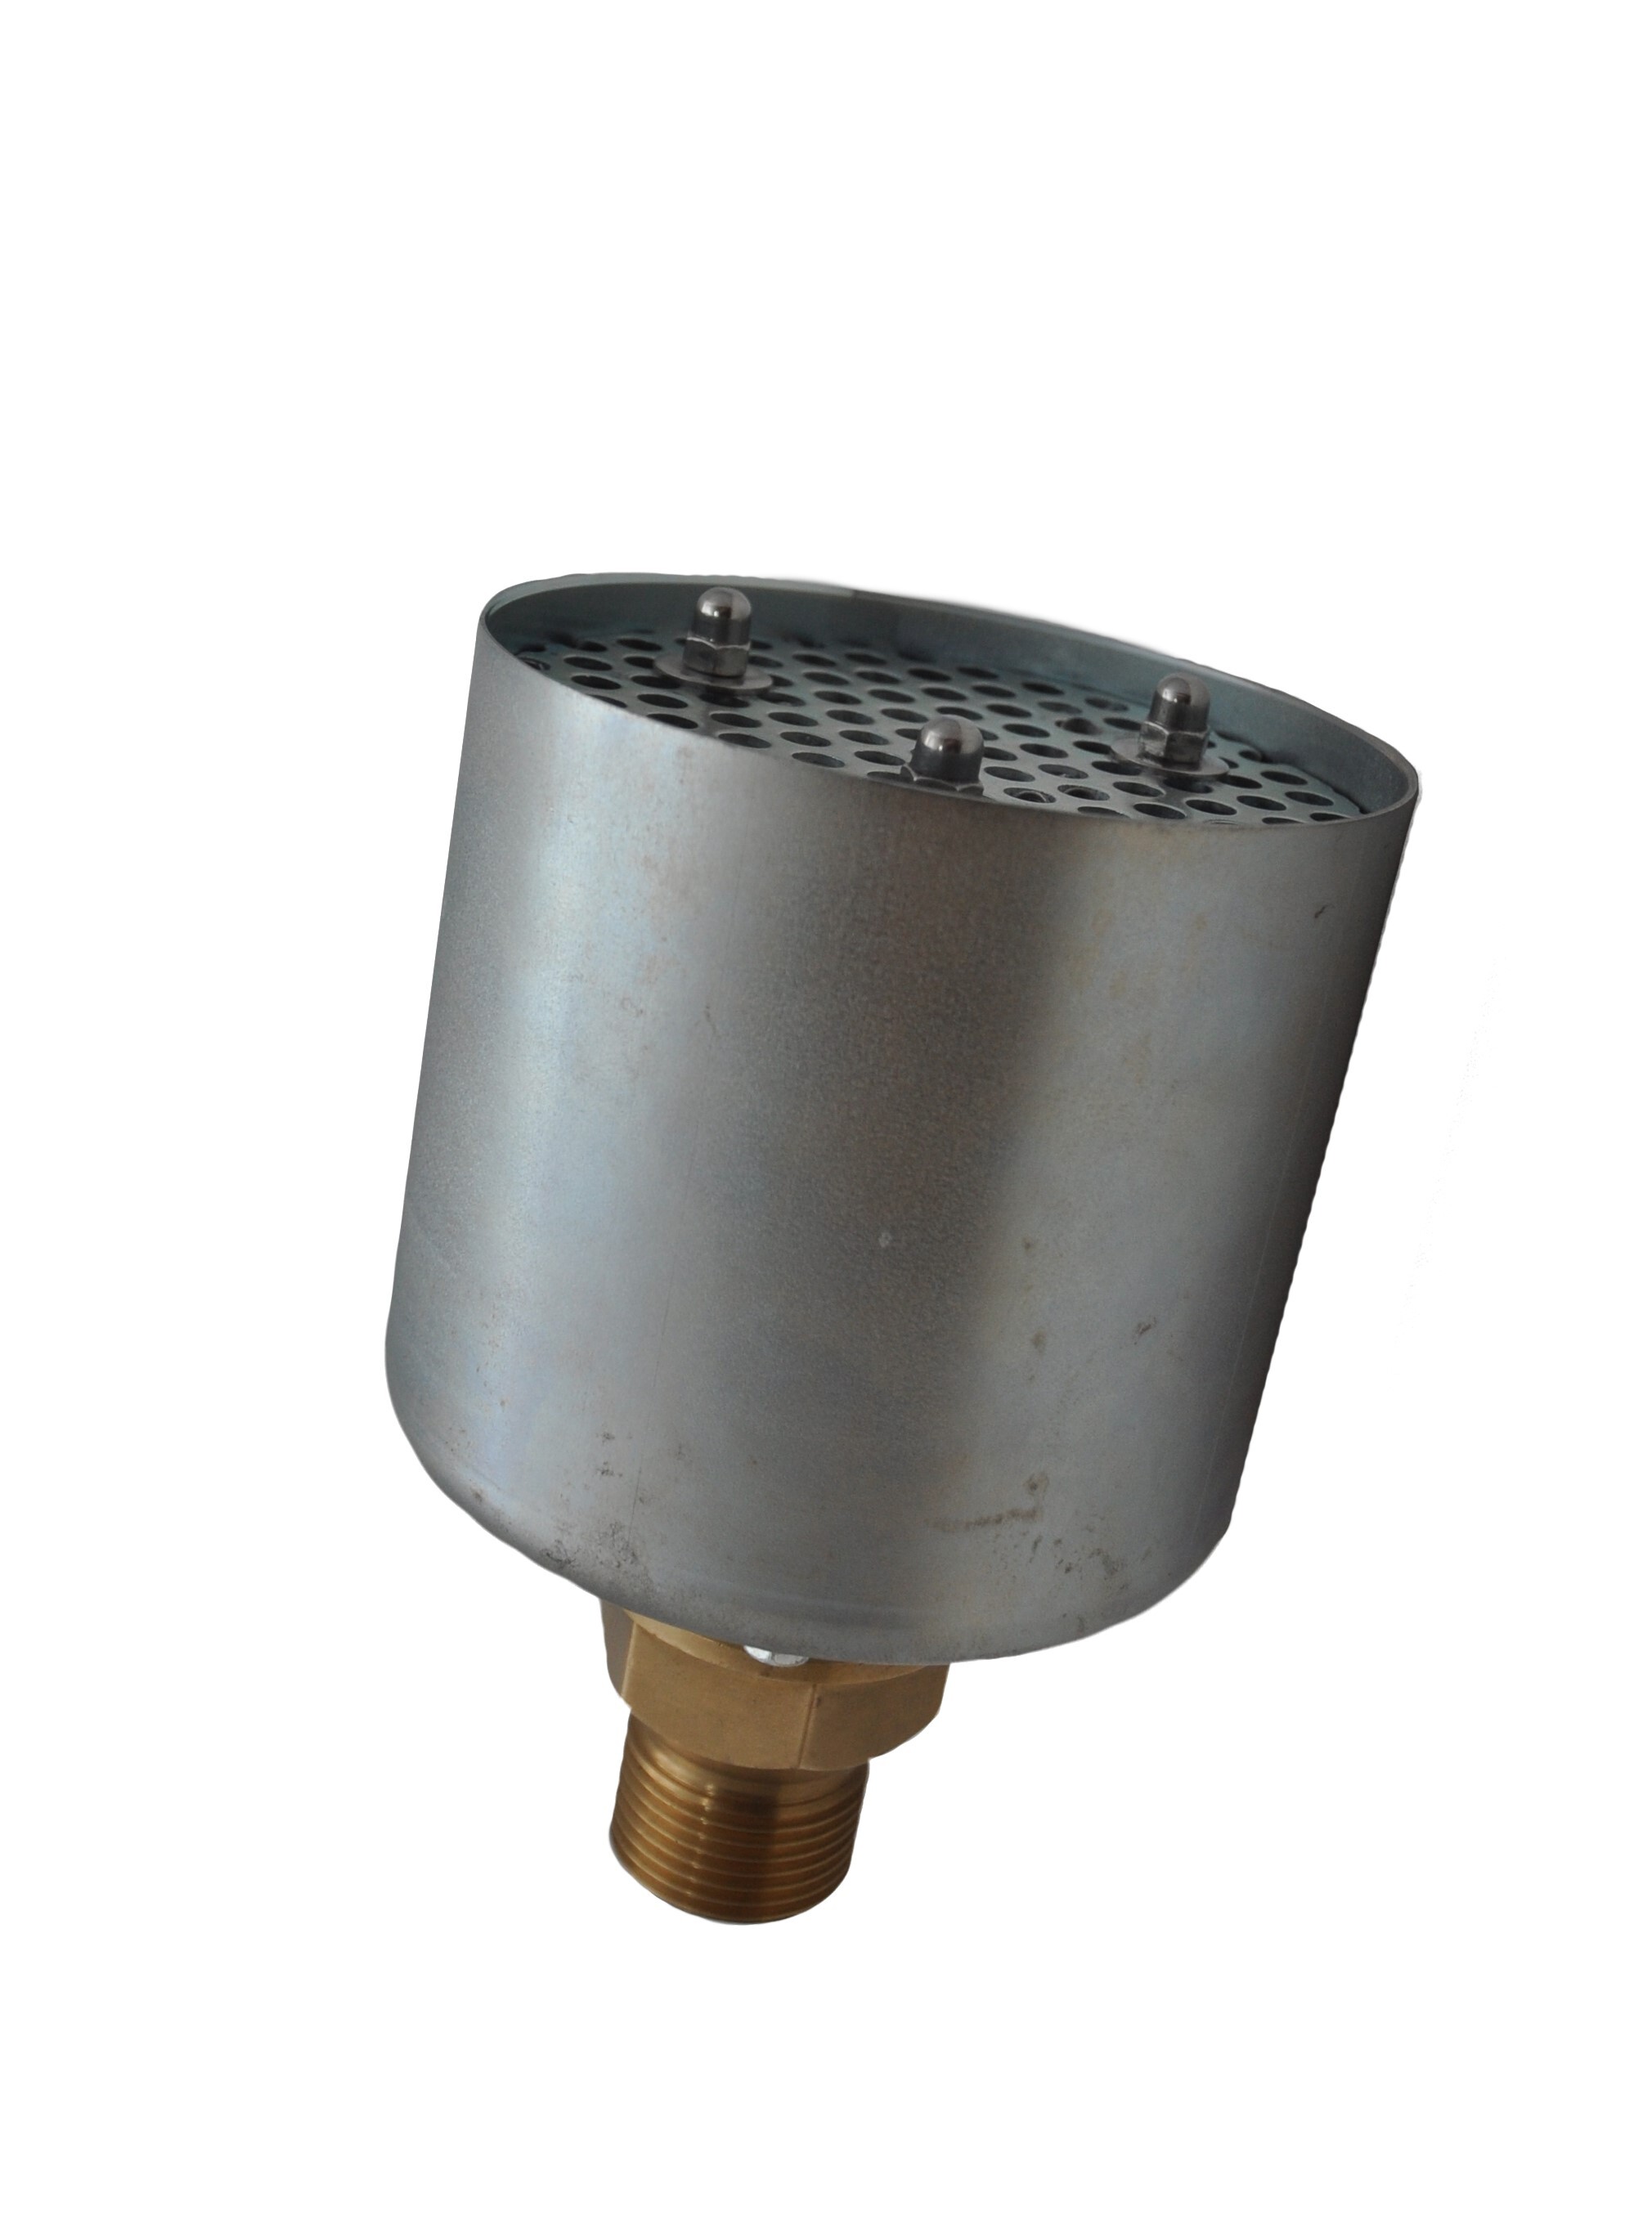 Muffler for gas standpipe